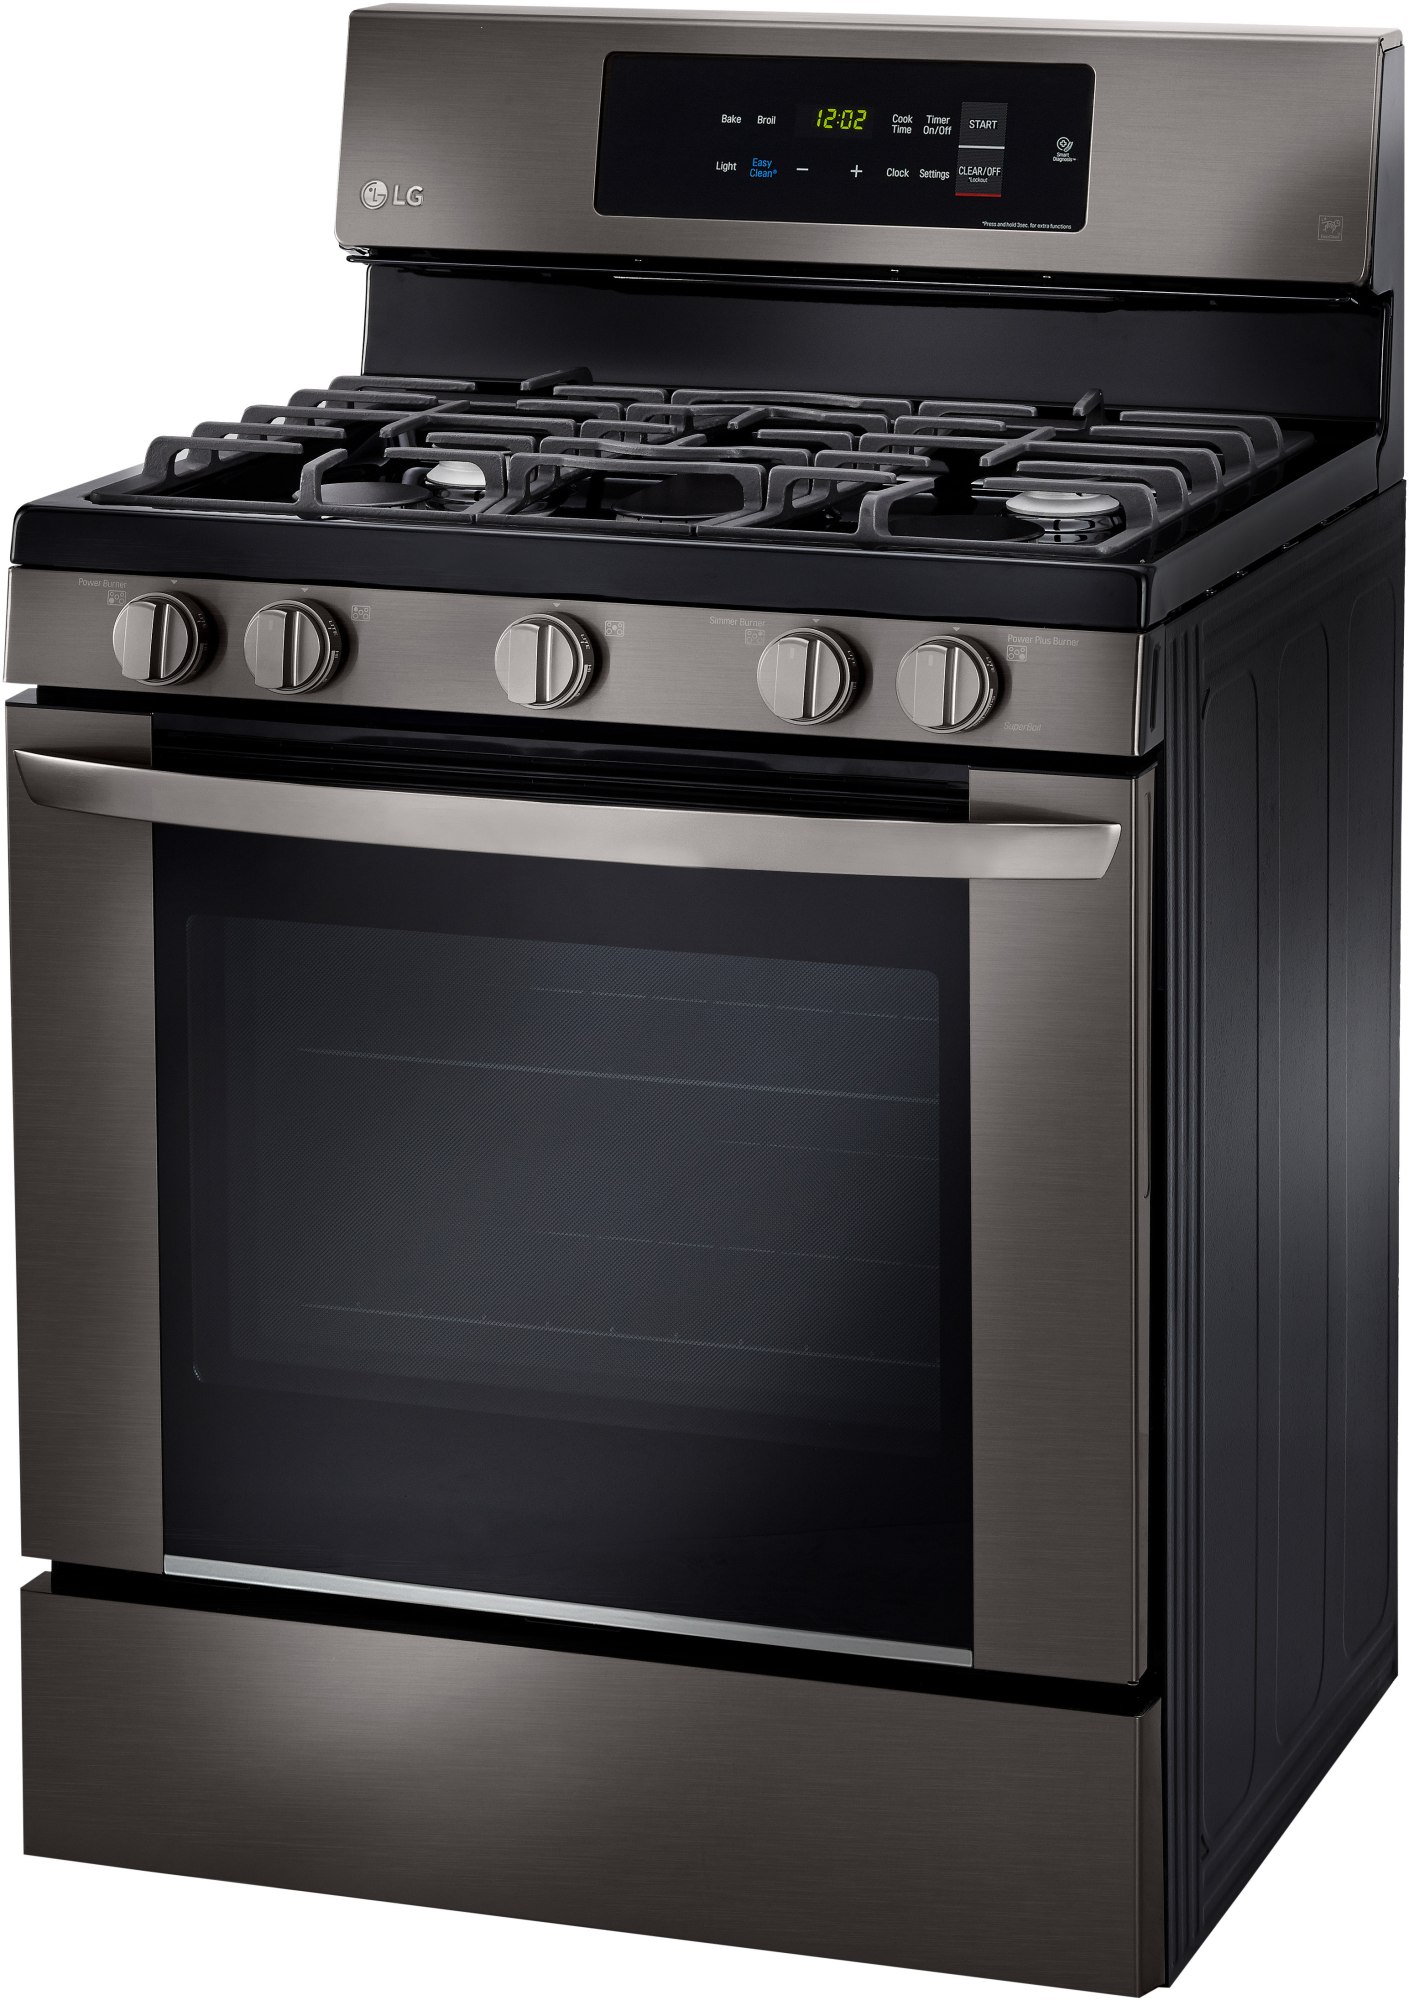 LG LRG3061BD 30 Inch Gas Range with 20 Minute EasyClean® Mode